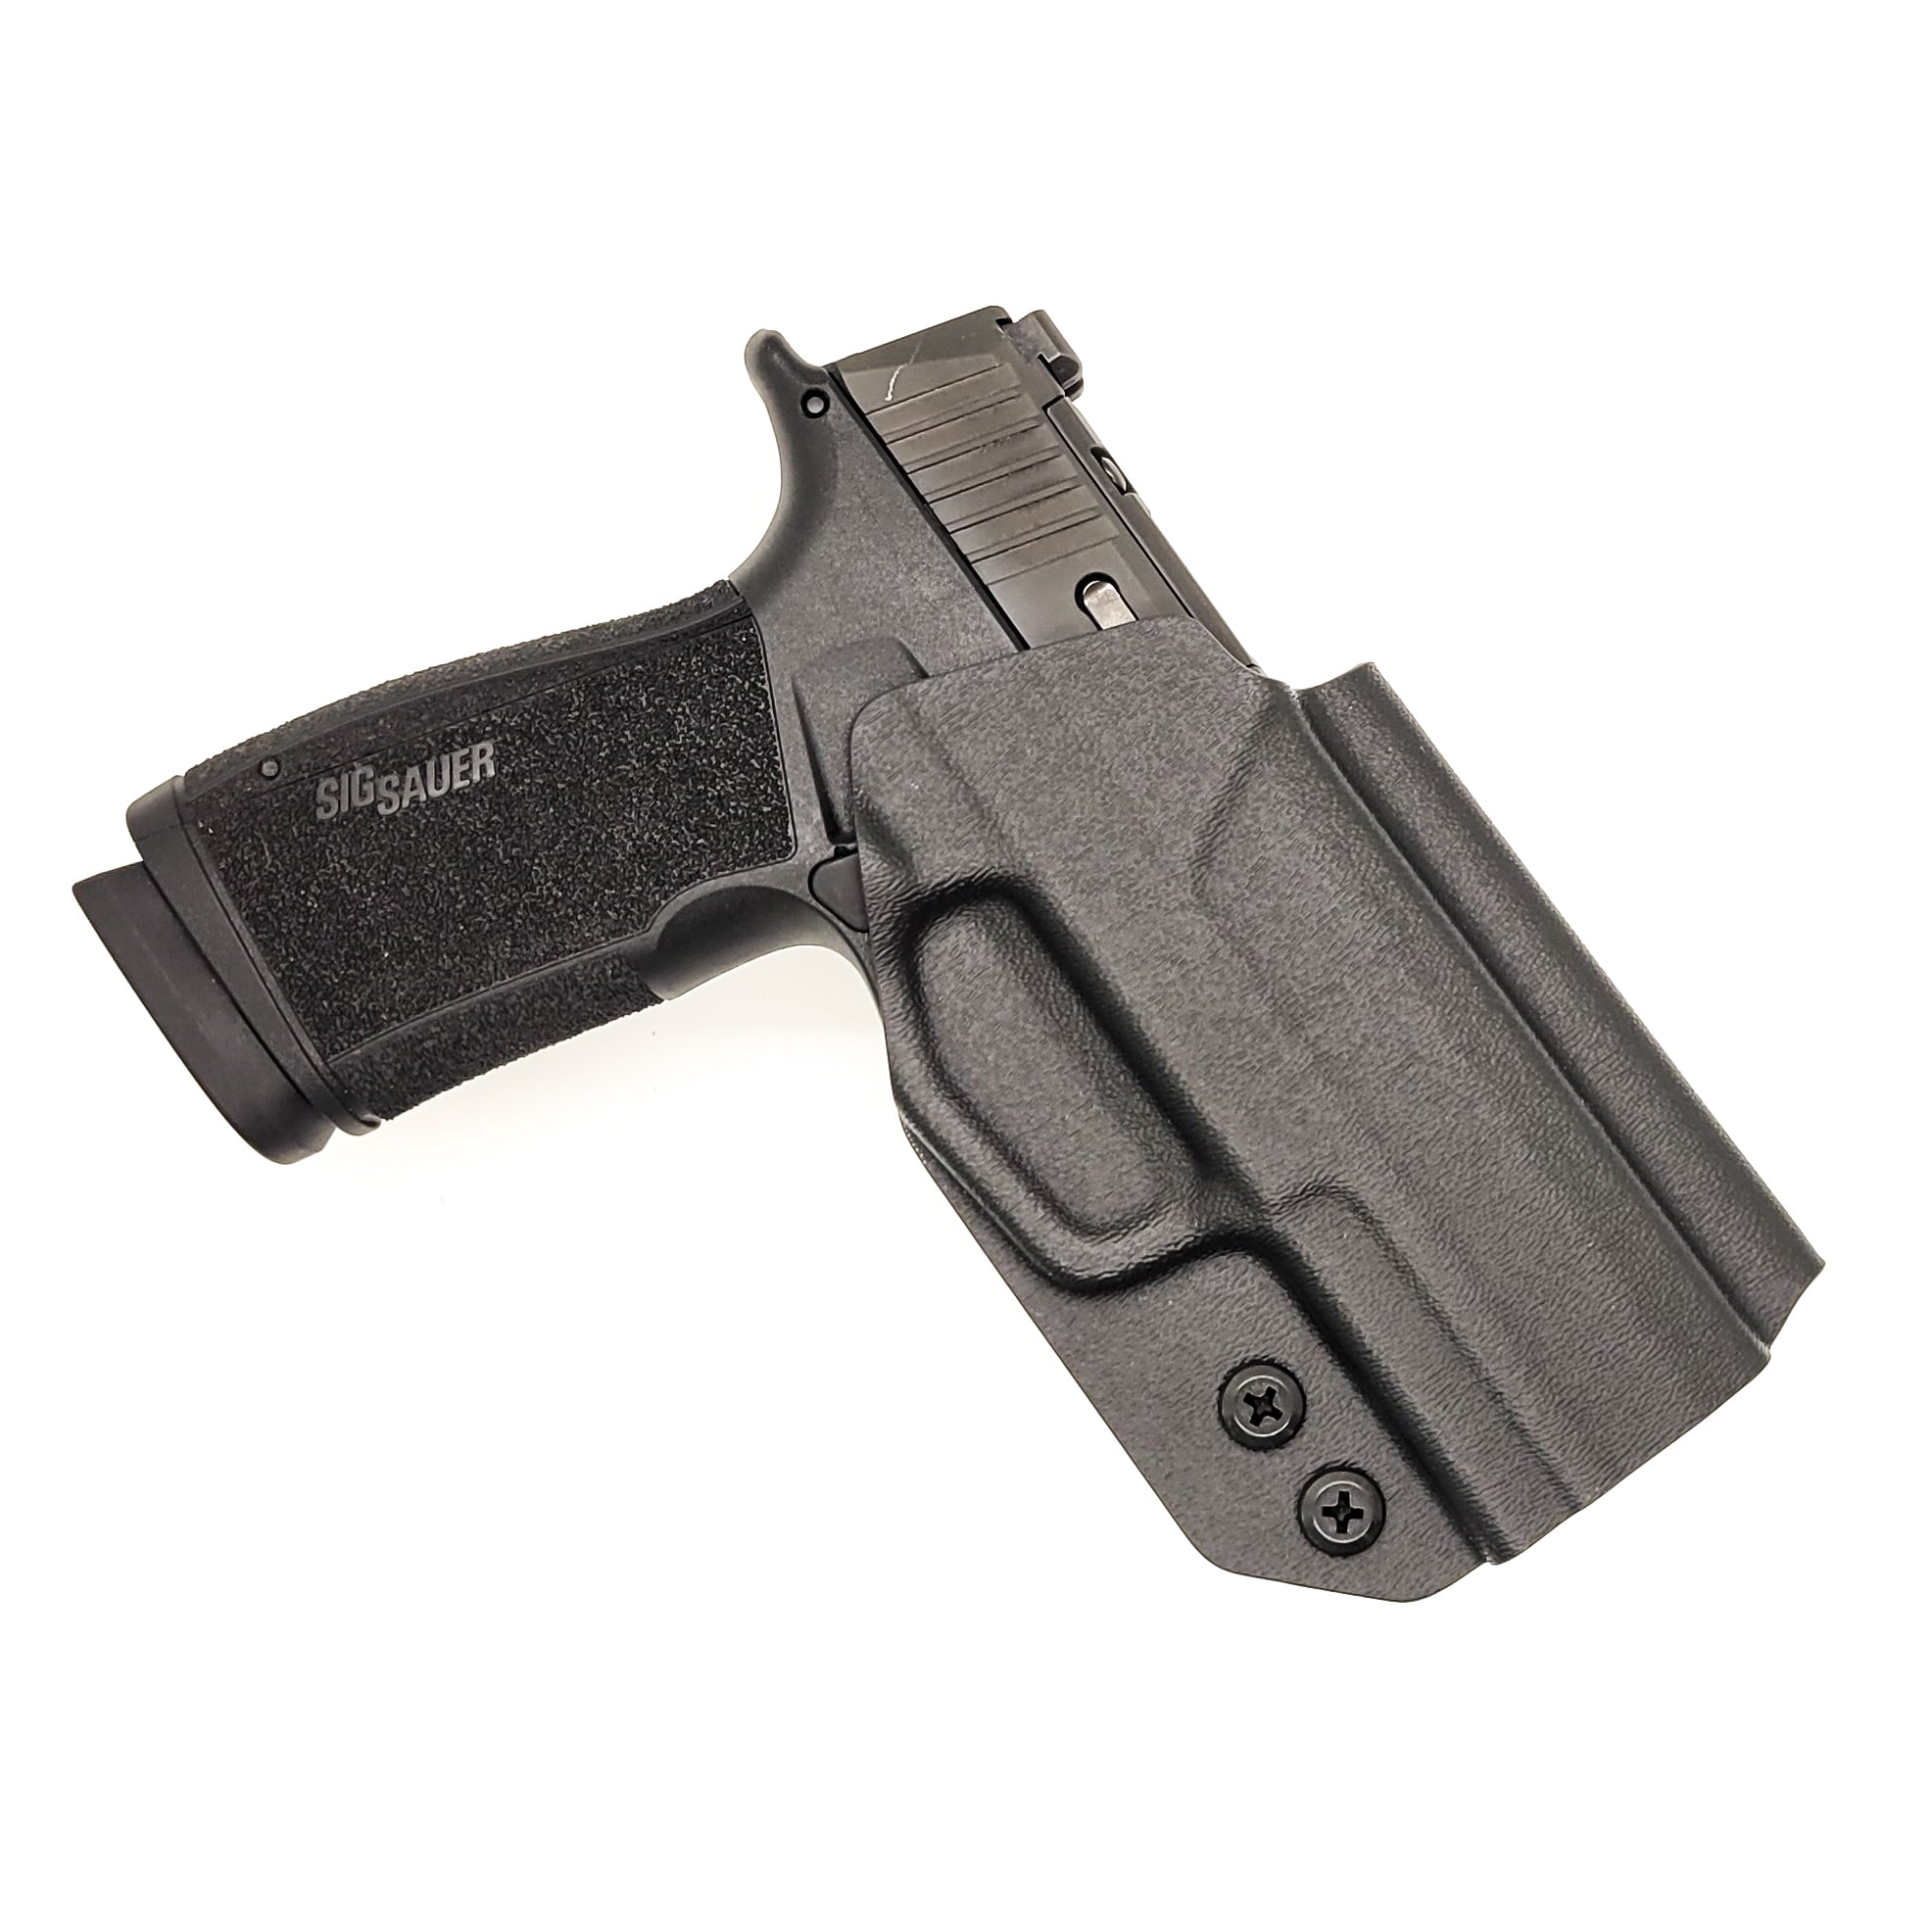 For the best, Outside Waistband OWB Kydex Holster designed to fit the Sig Sauer P365-XMACRO COMP, P365-XMACRO, P365-XMACRO TACOPS, and P365-XMACRO COMP ROMEOZERO ELITE handgun, shop Four Brothers Holsters. Full sweat guard, adjustable retention. Open muzzle for threaded barrels, cleared for red dot sights. Made in USA